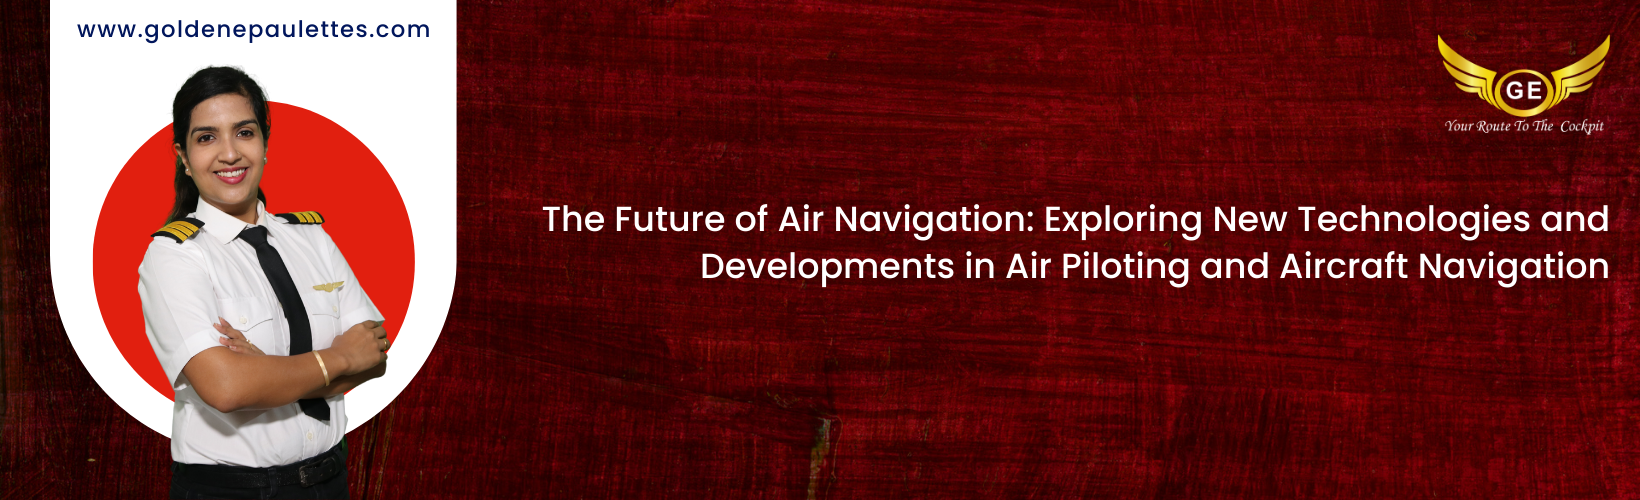 The Future of Air Navigation